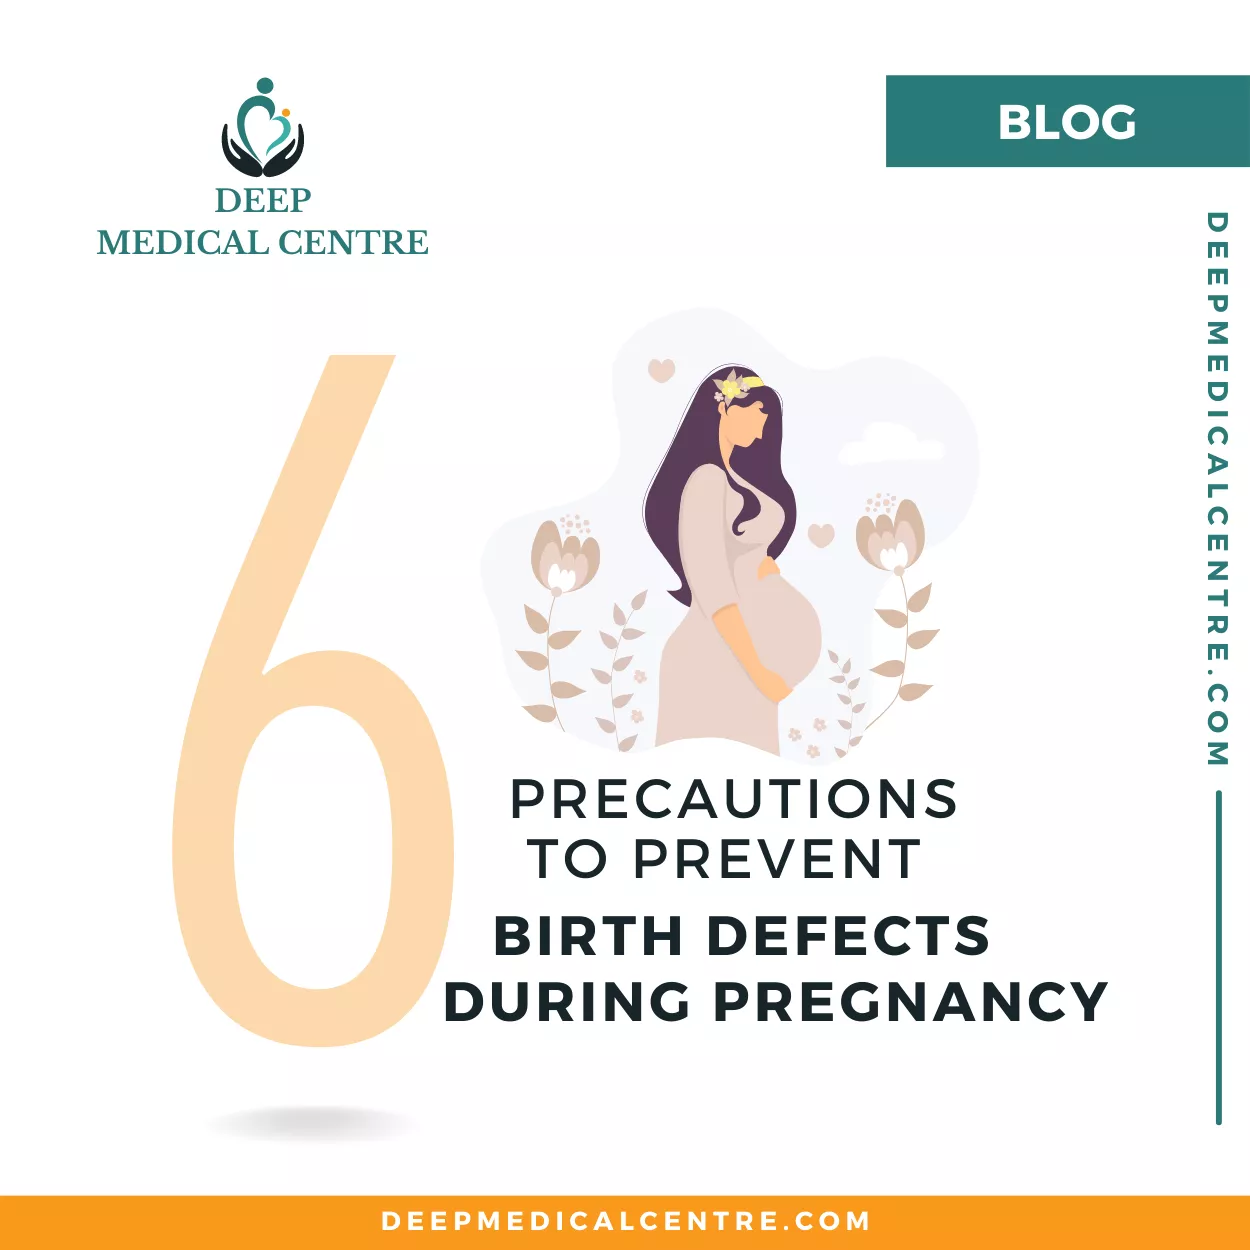 6 Precautions to Prevent Birth Defects During Pregnancy